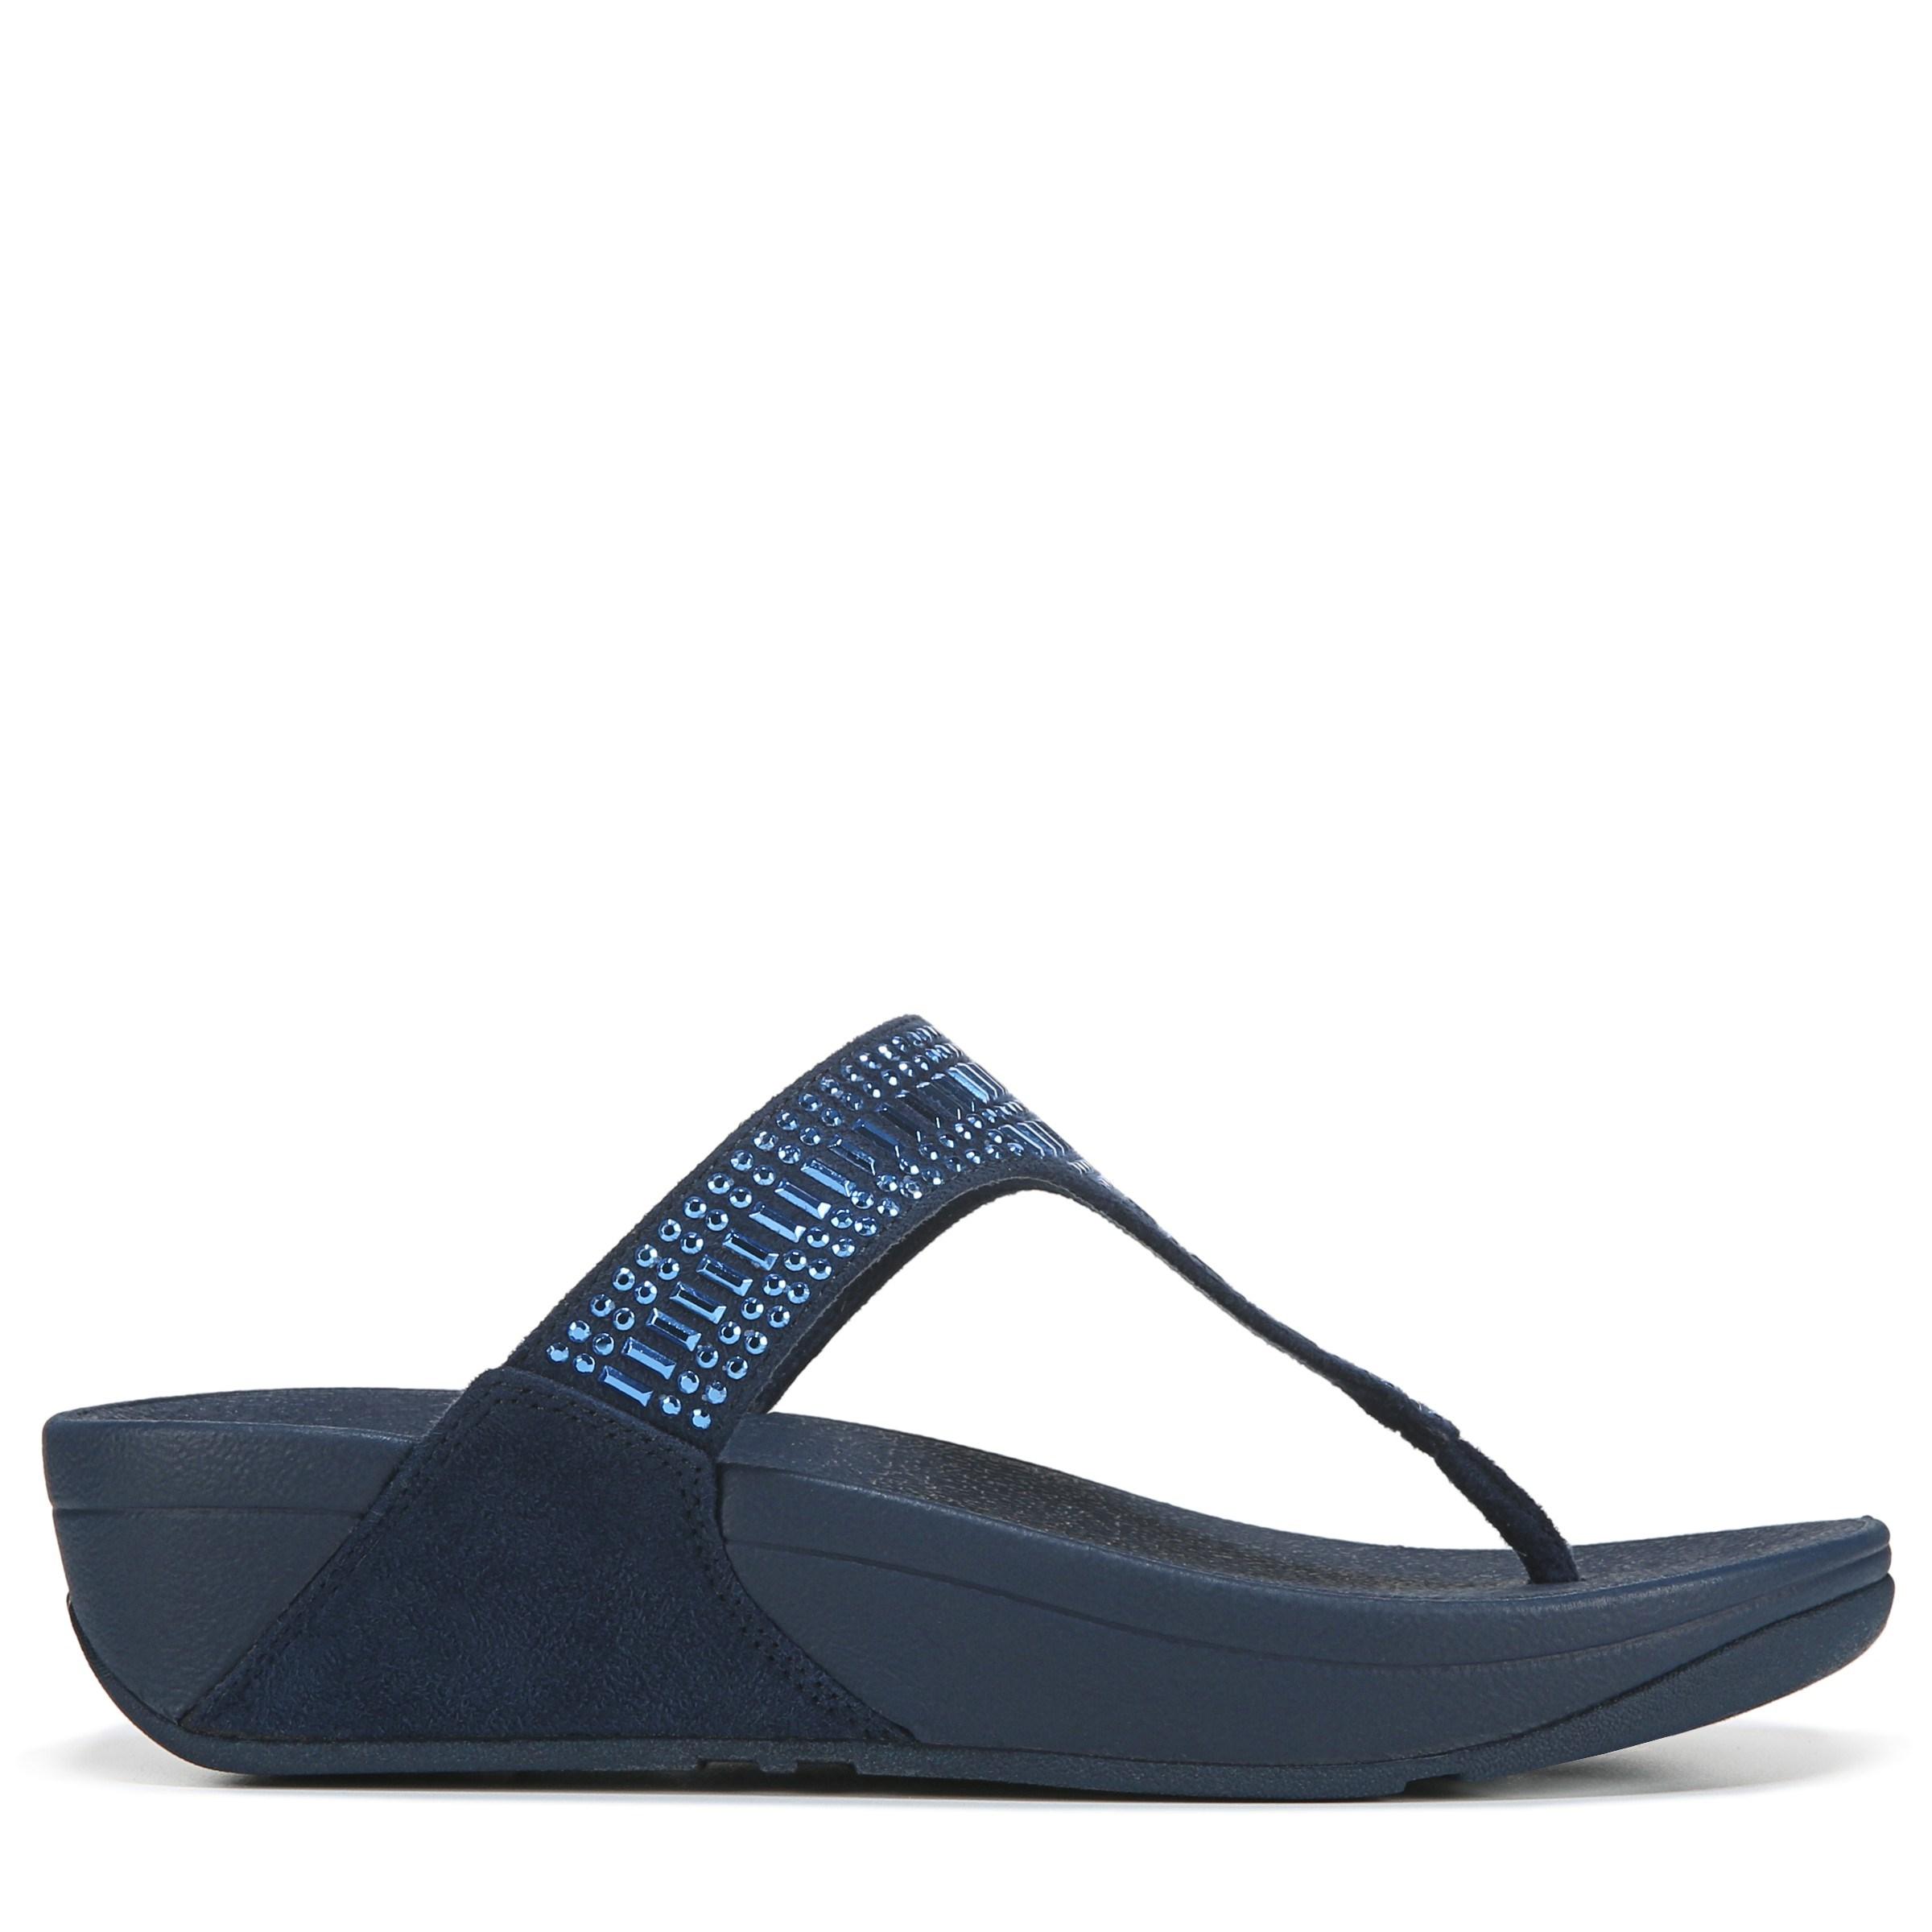 Fitflop Rubber Incastone Wedge Thong Sandals in Navy (Blue) - Lyst